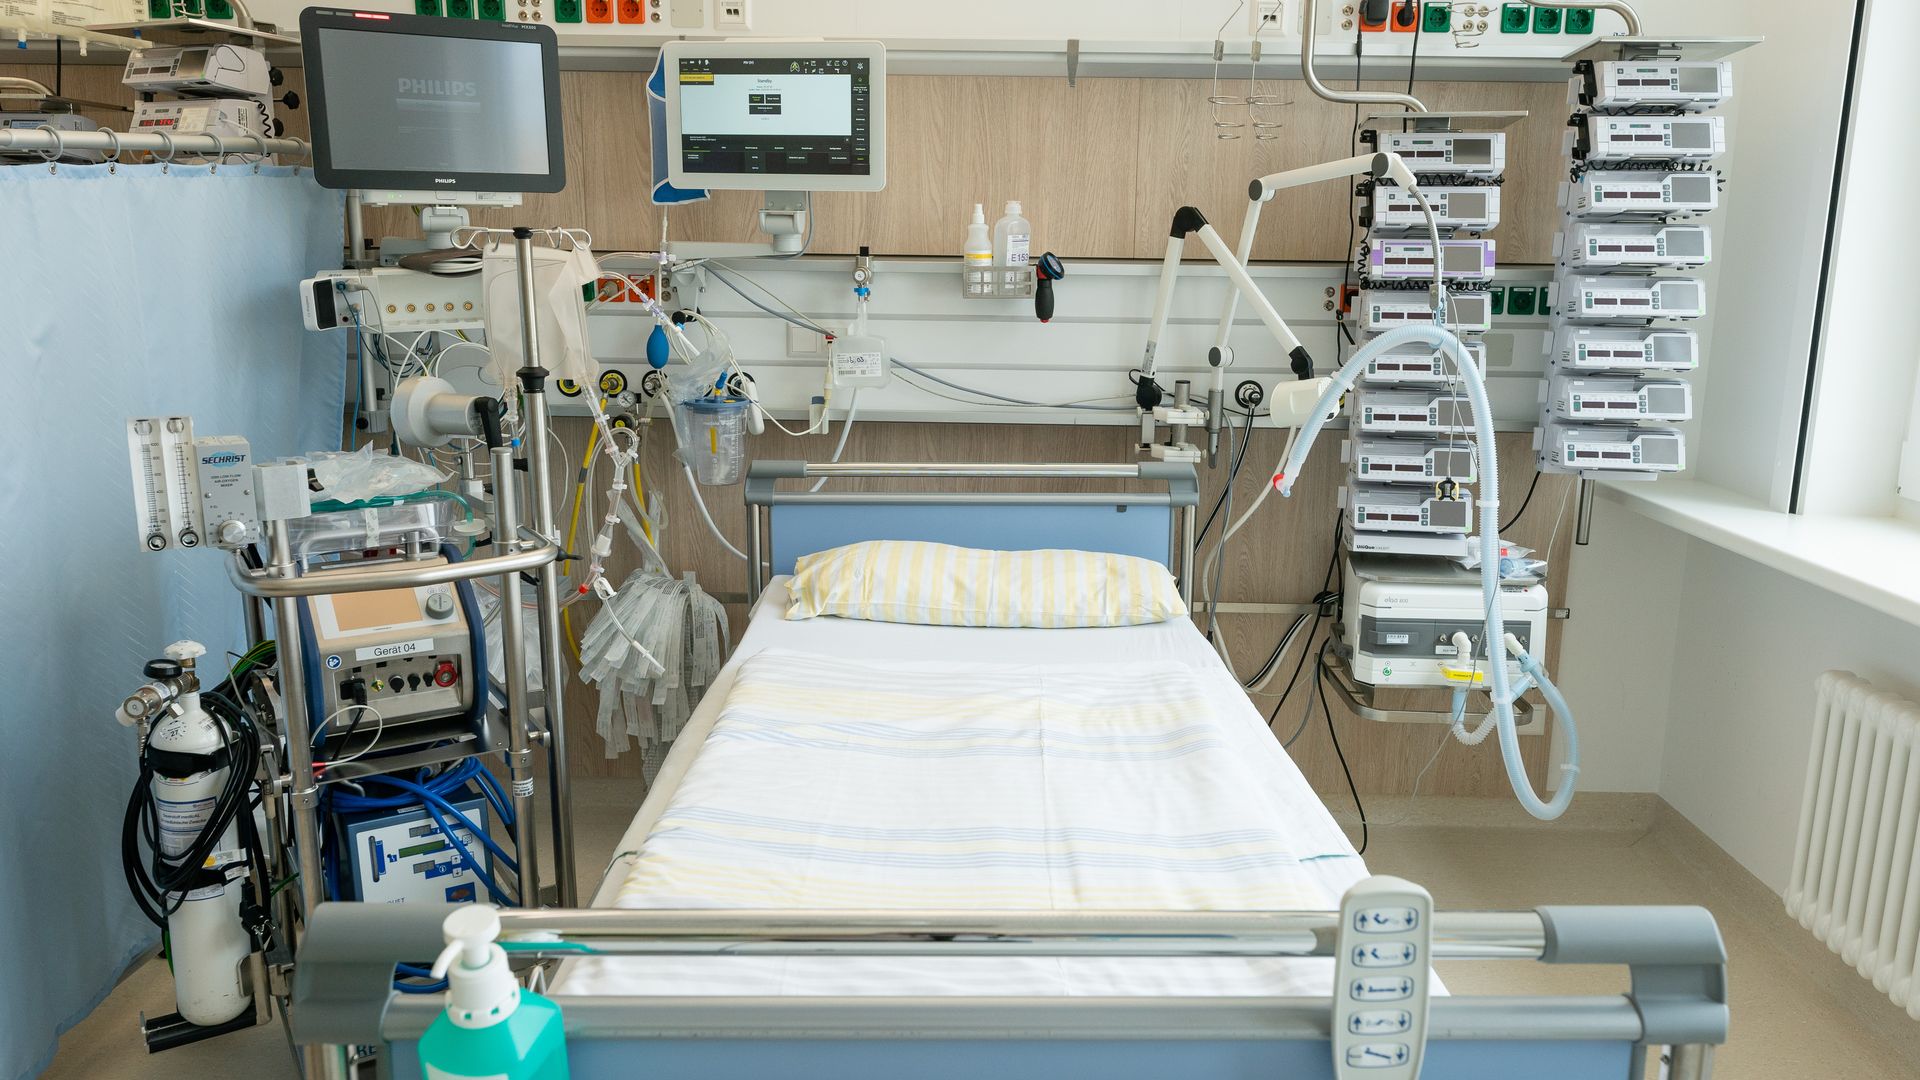 Image of a hospital ICU bed